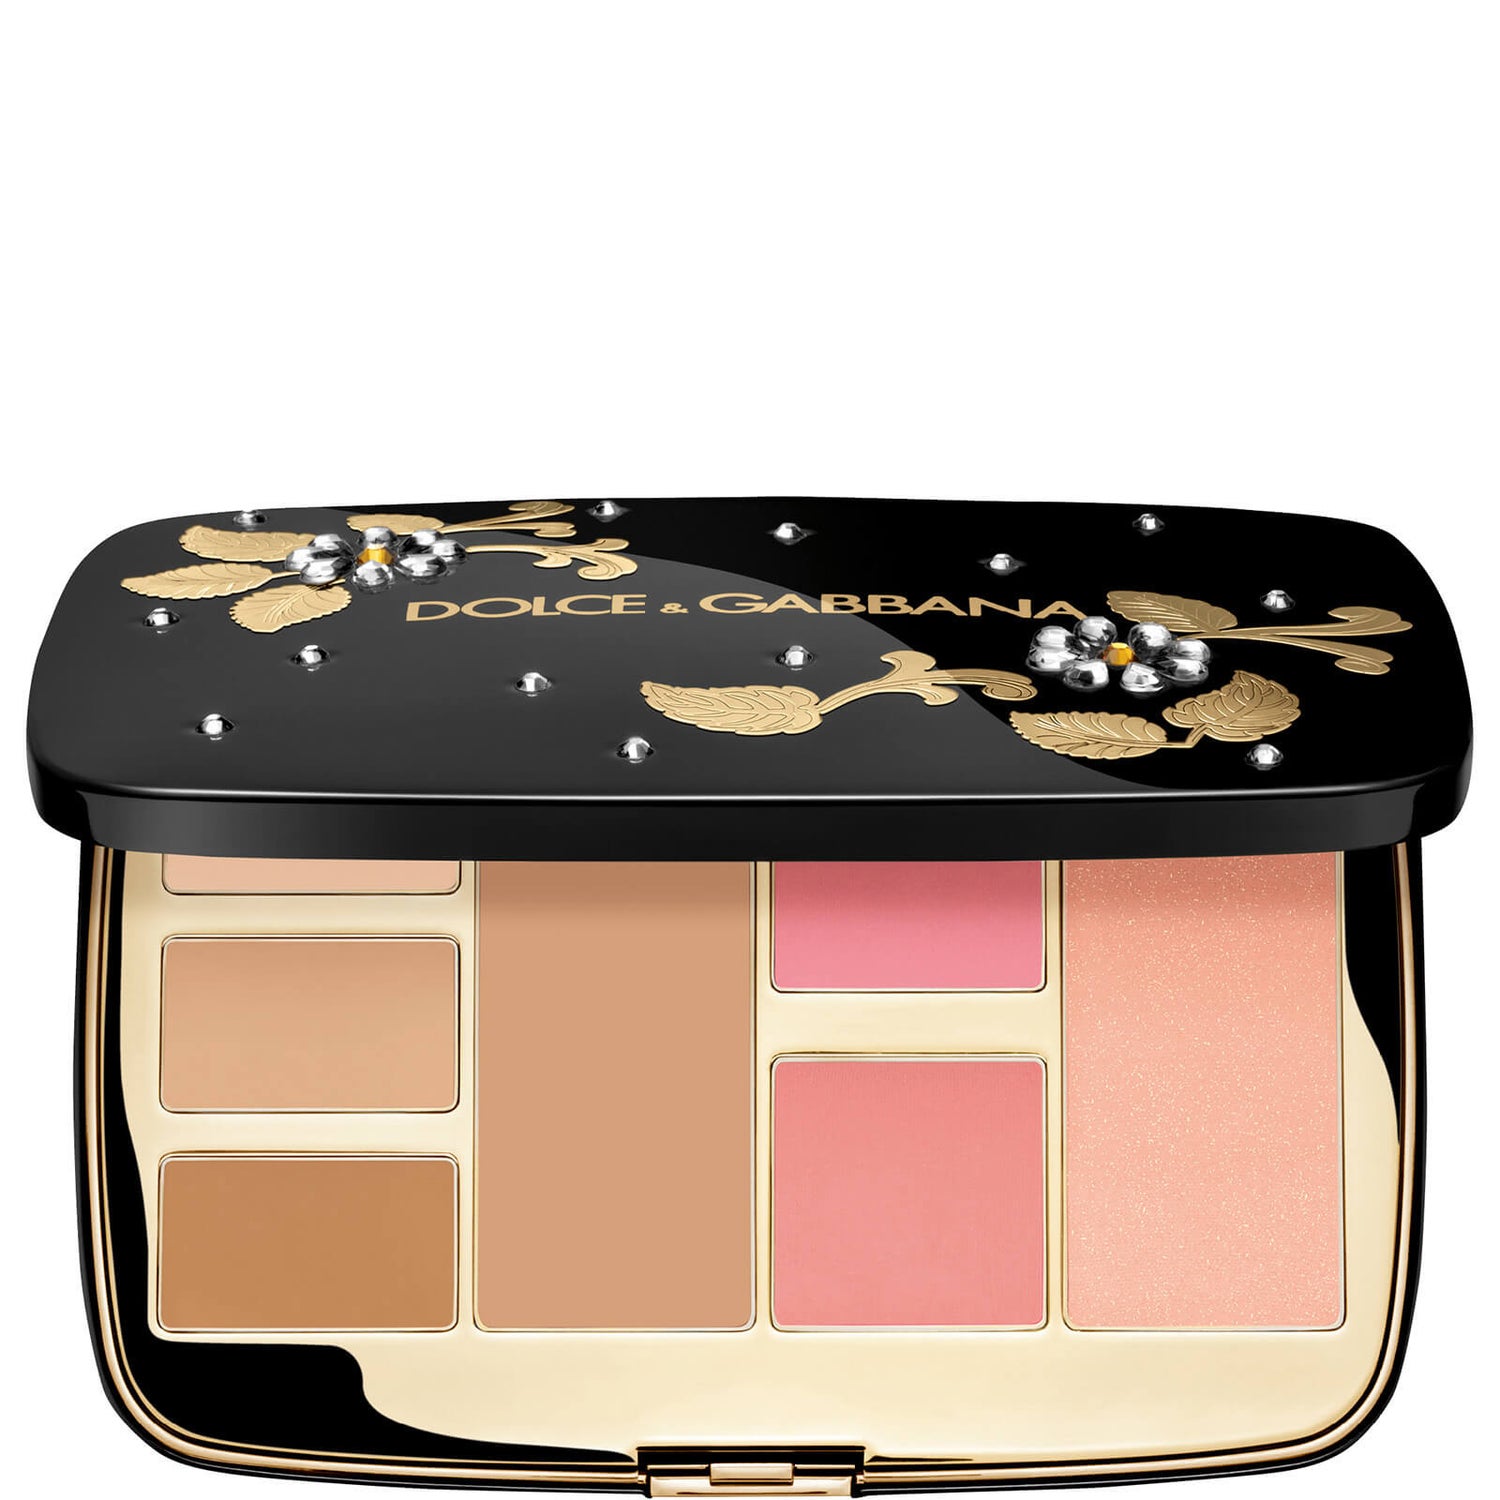 Dolce&Gabbana Dolce Skin All-in-One Face Palette